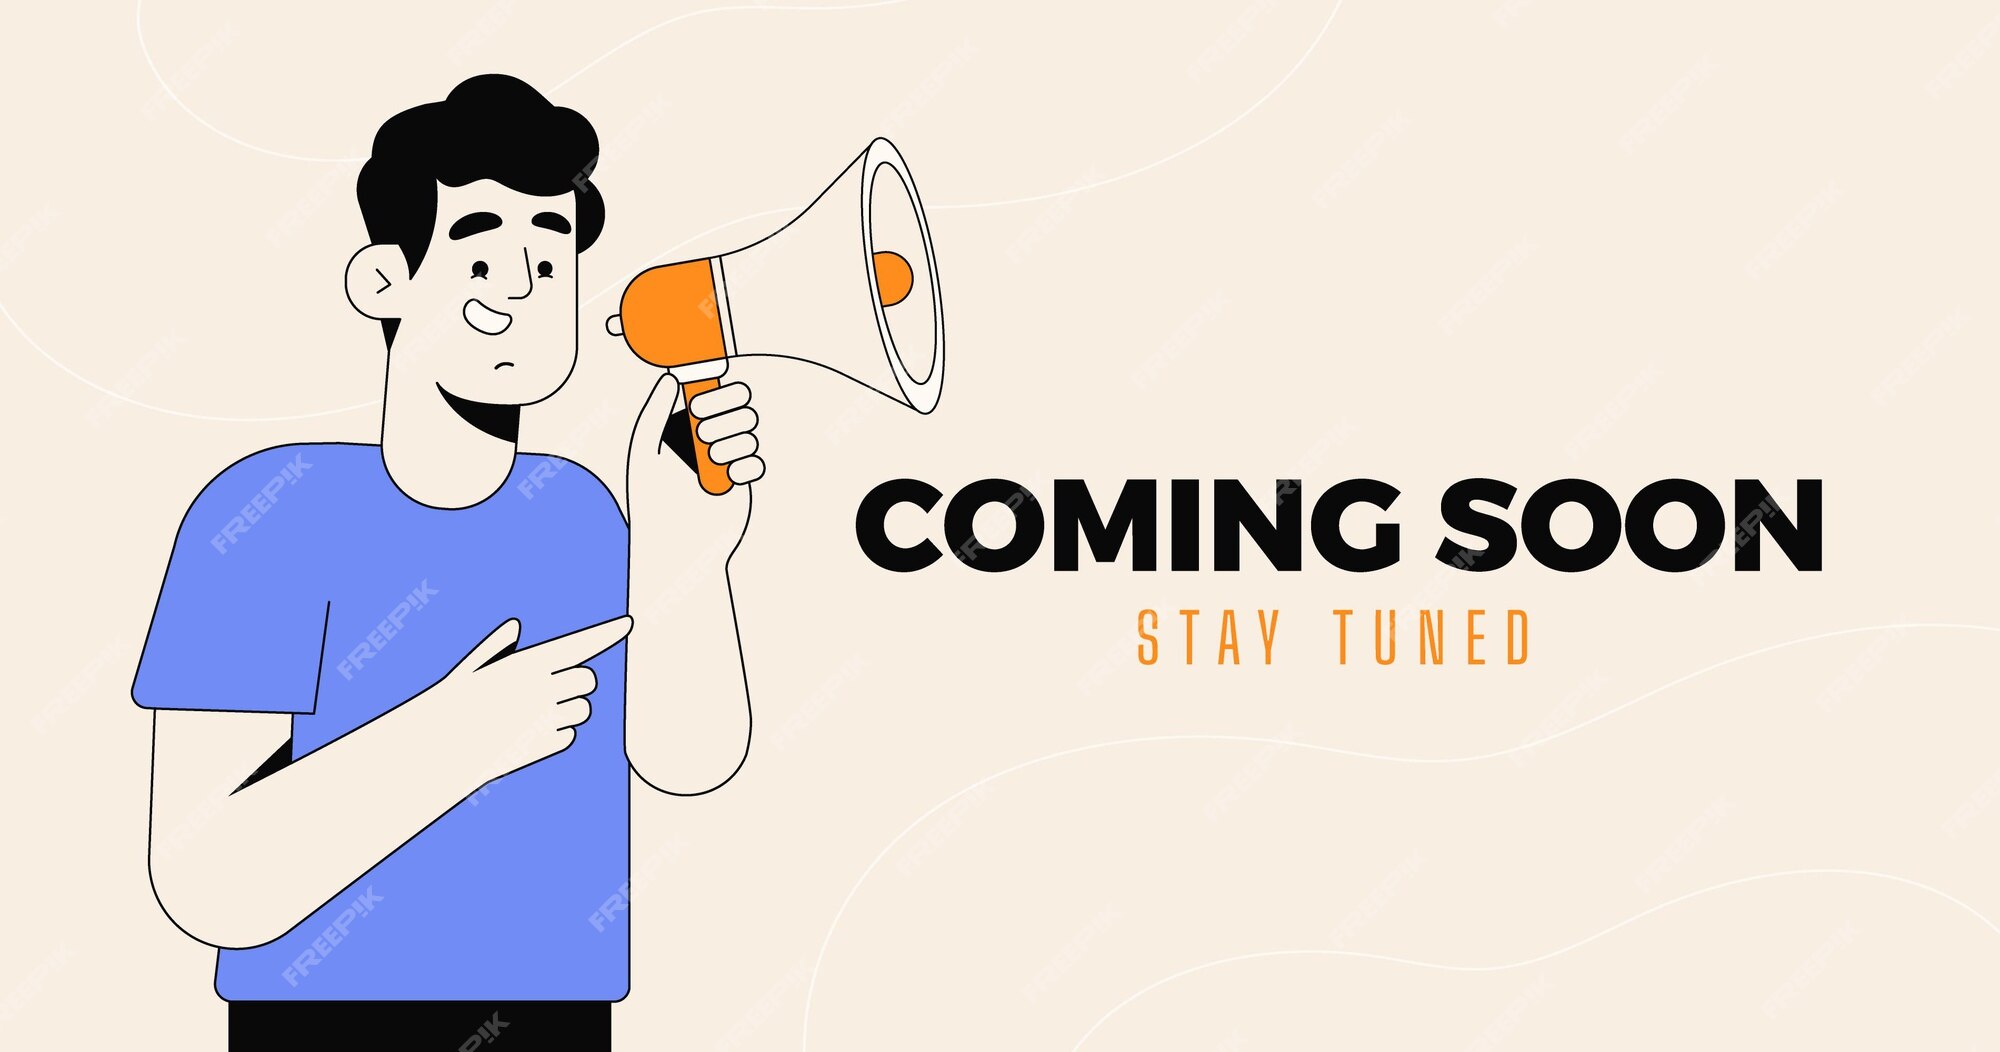 Soon Images | Free Vectors, Stock Photos & PSD